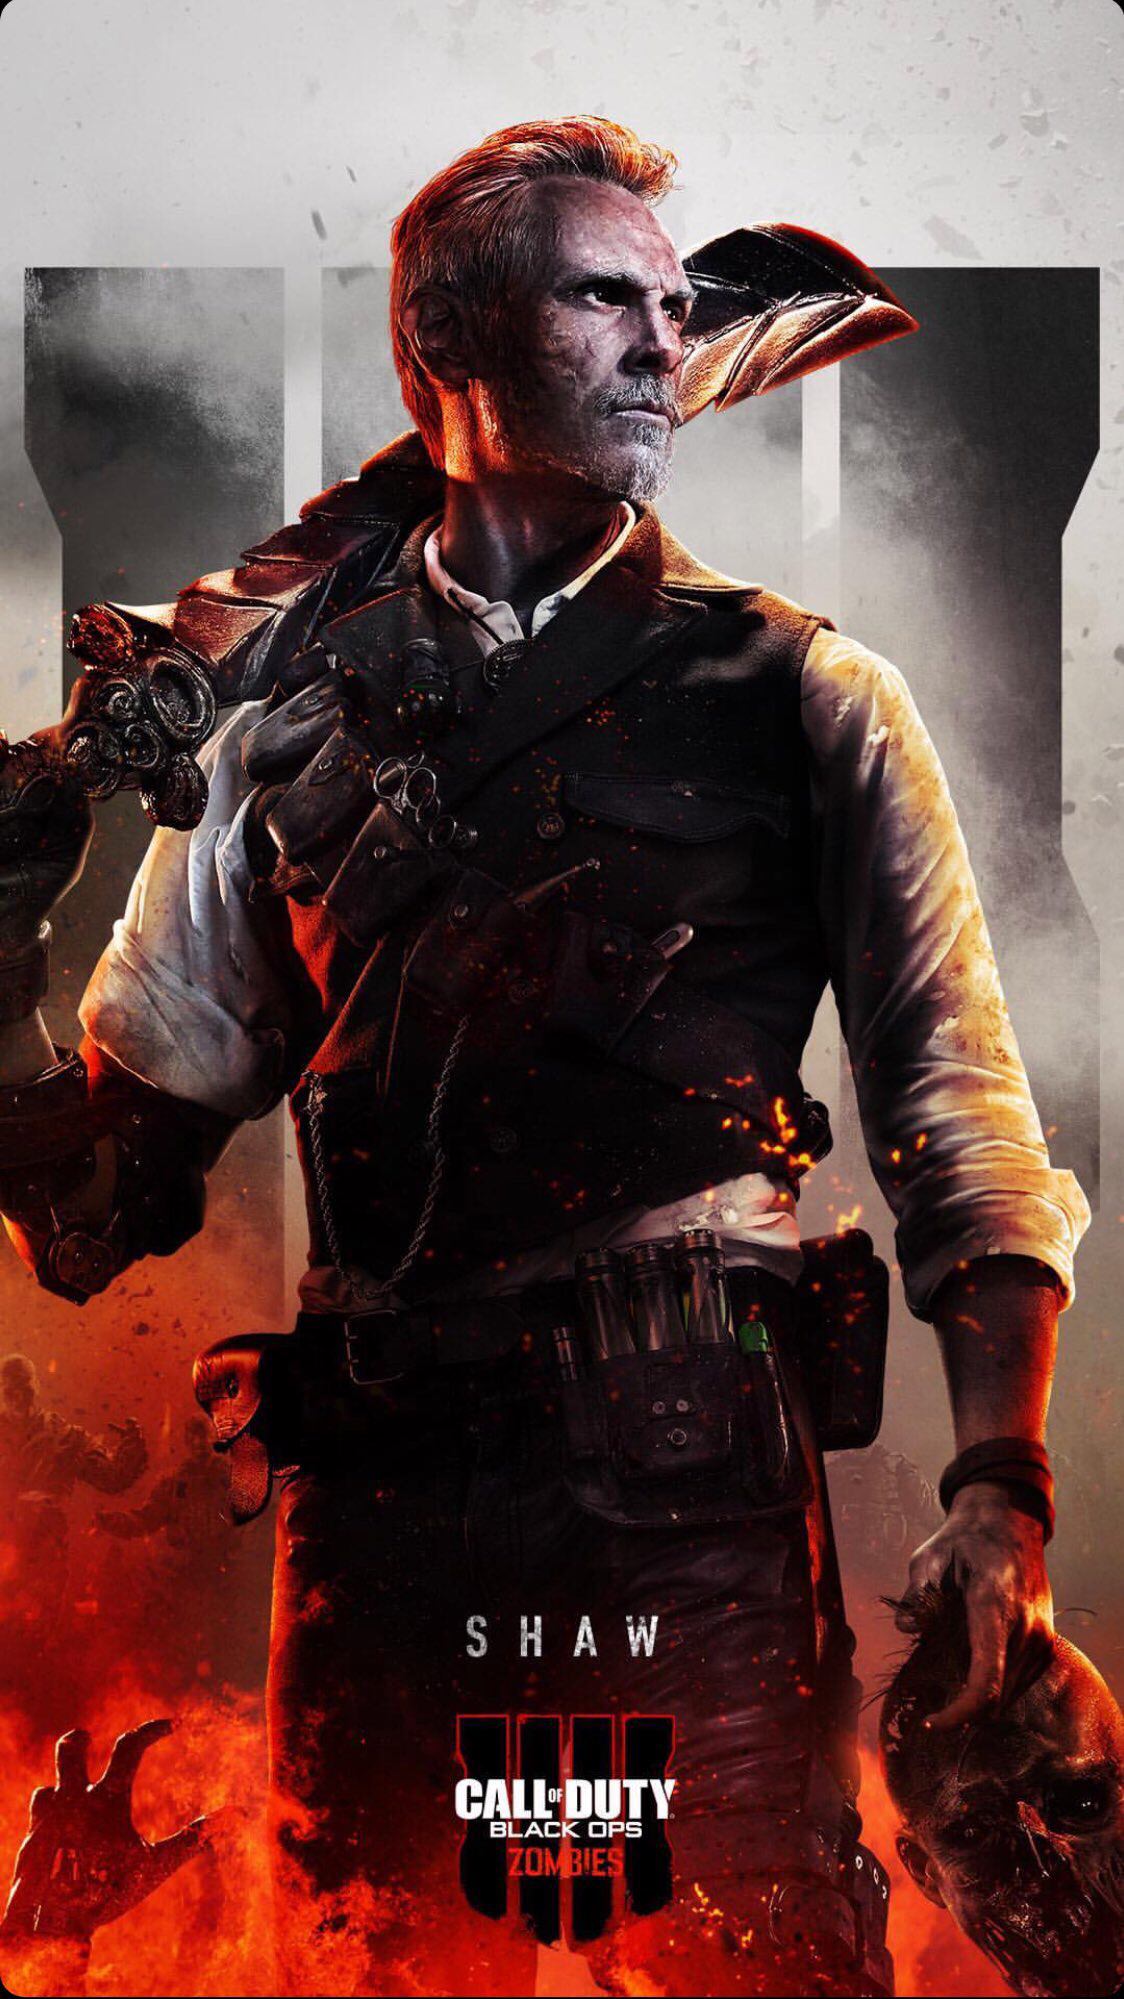 New Black Ops Zombies phone wallpapers Charlie INTEL